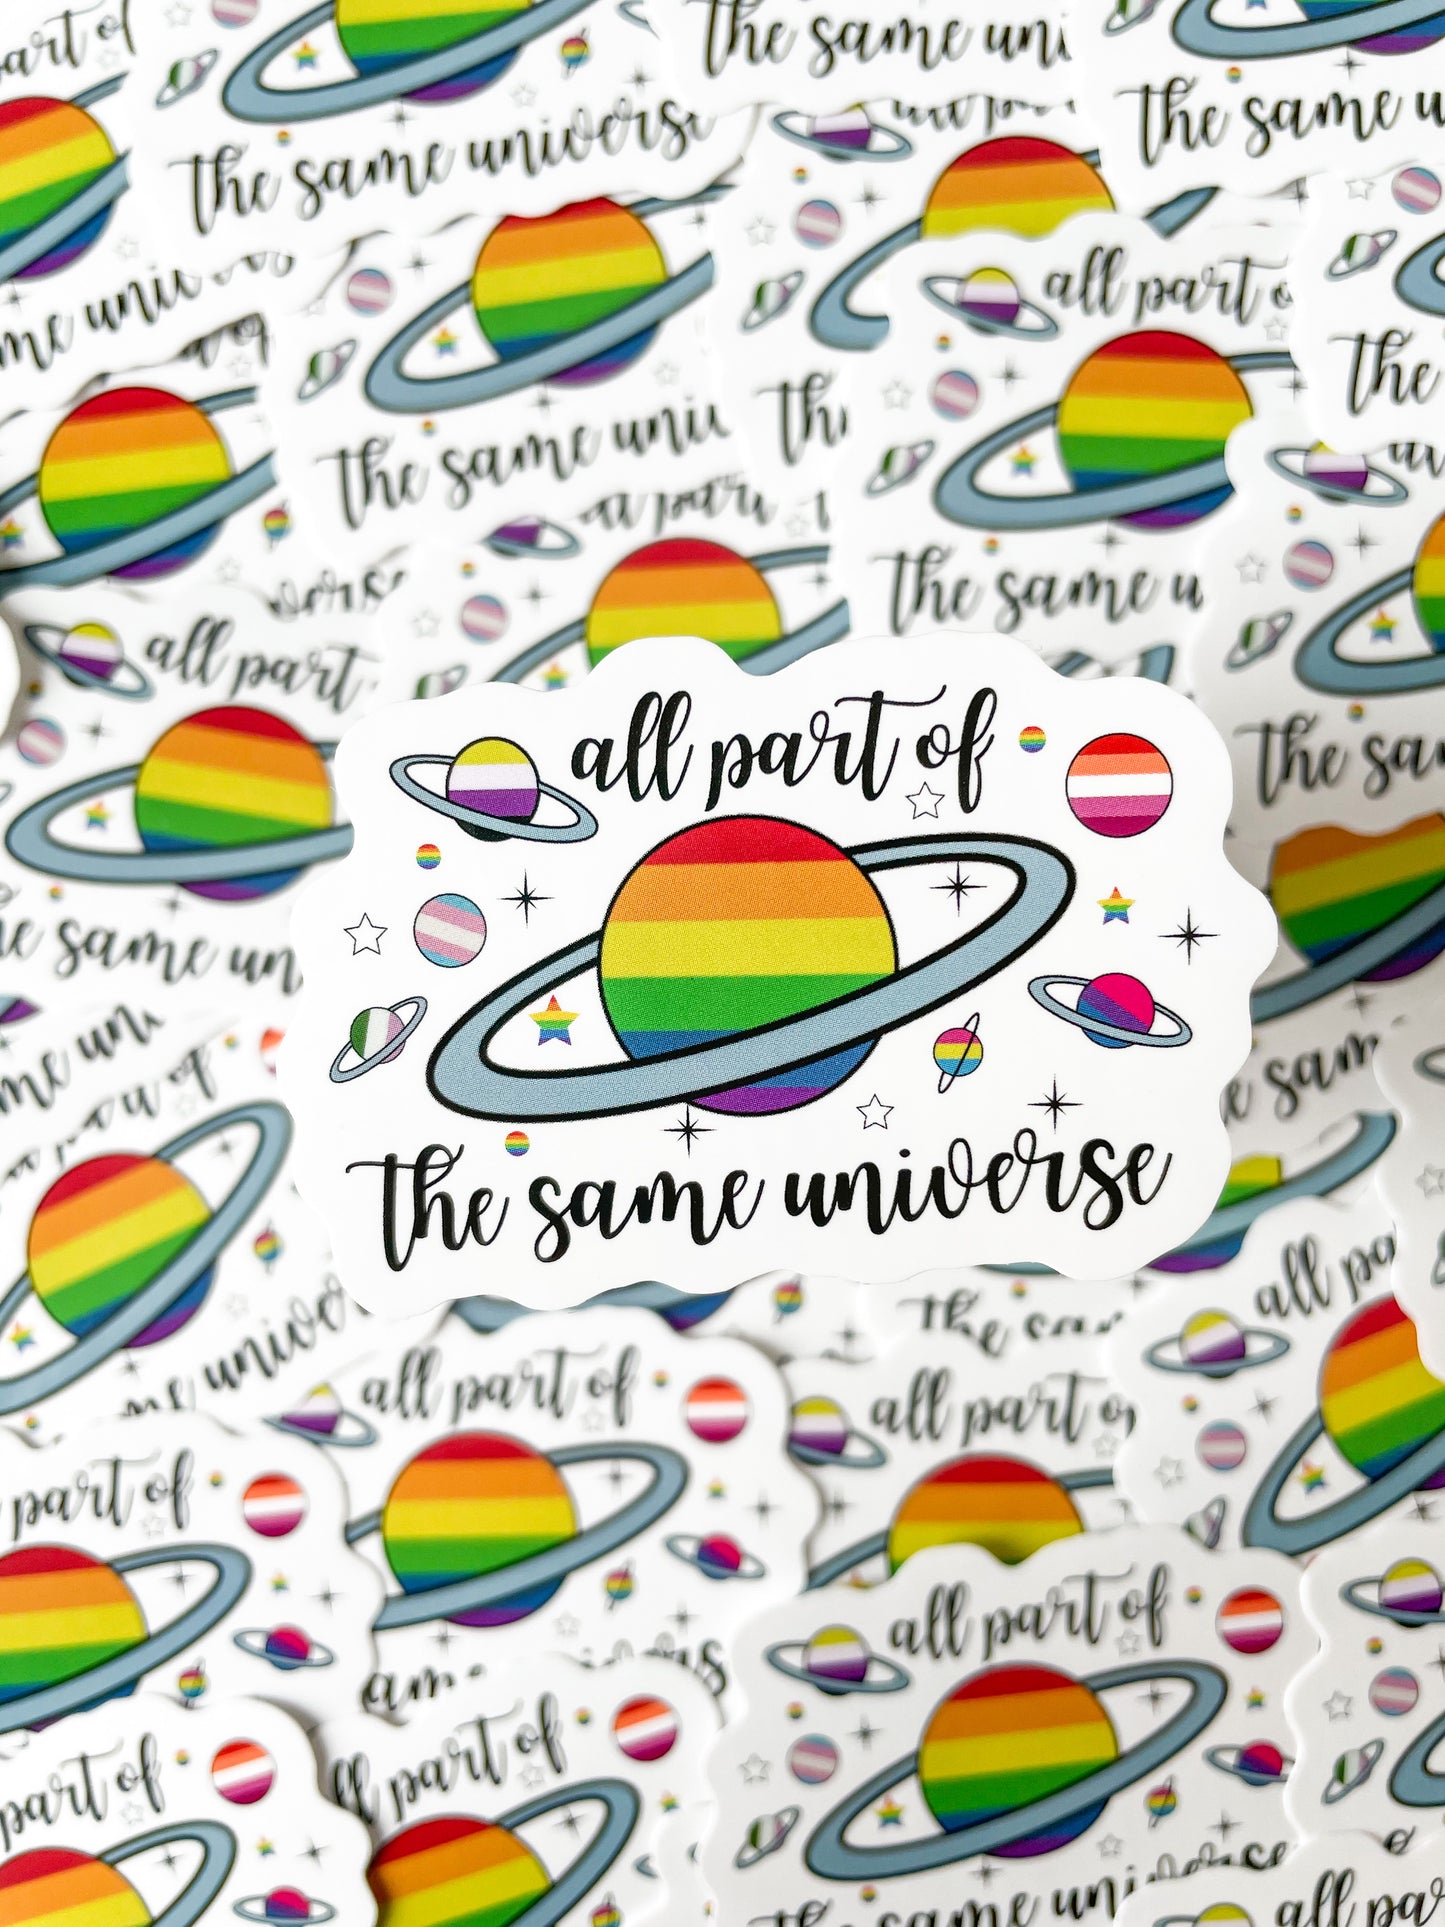 All part of the same universe sticker